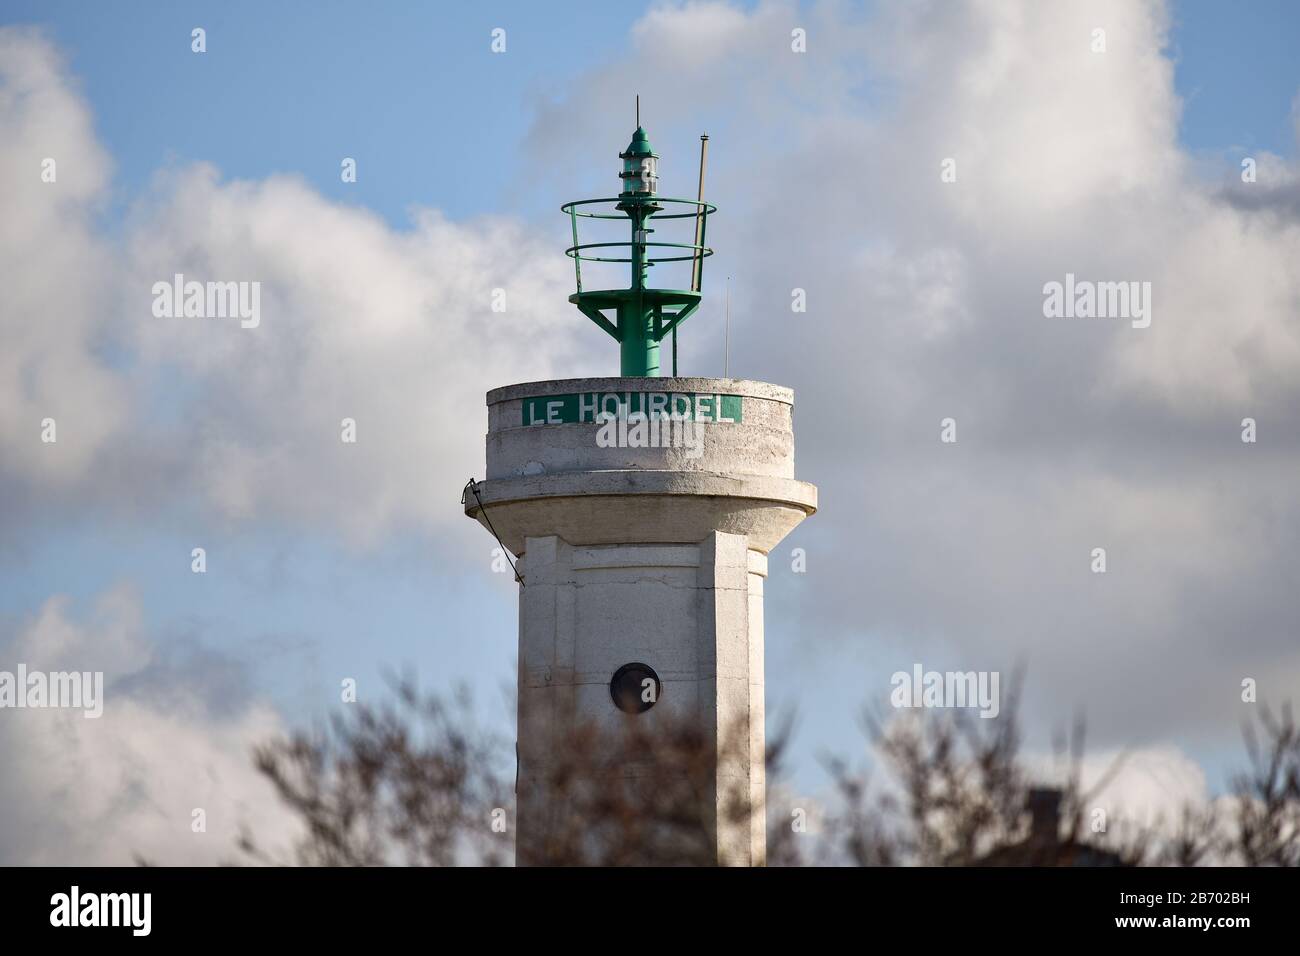 Lighthouse of le hourdel in the bay of Somme, Cayeux-sur-mer, France. Stock Photo